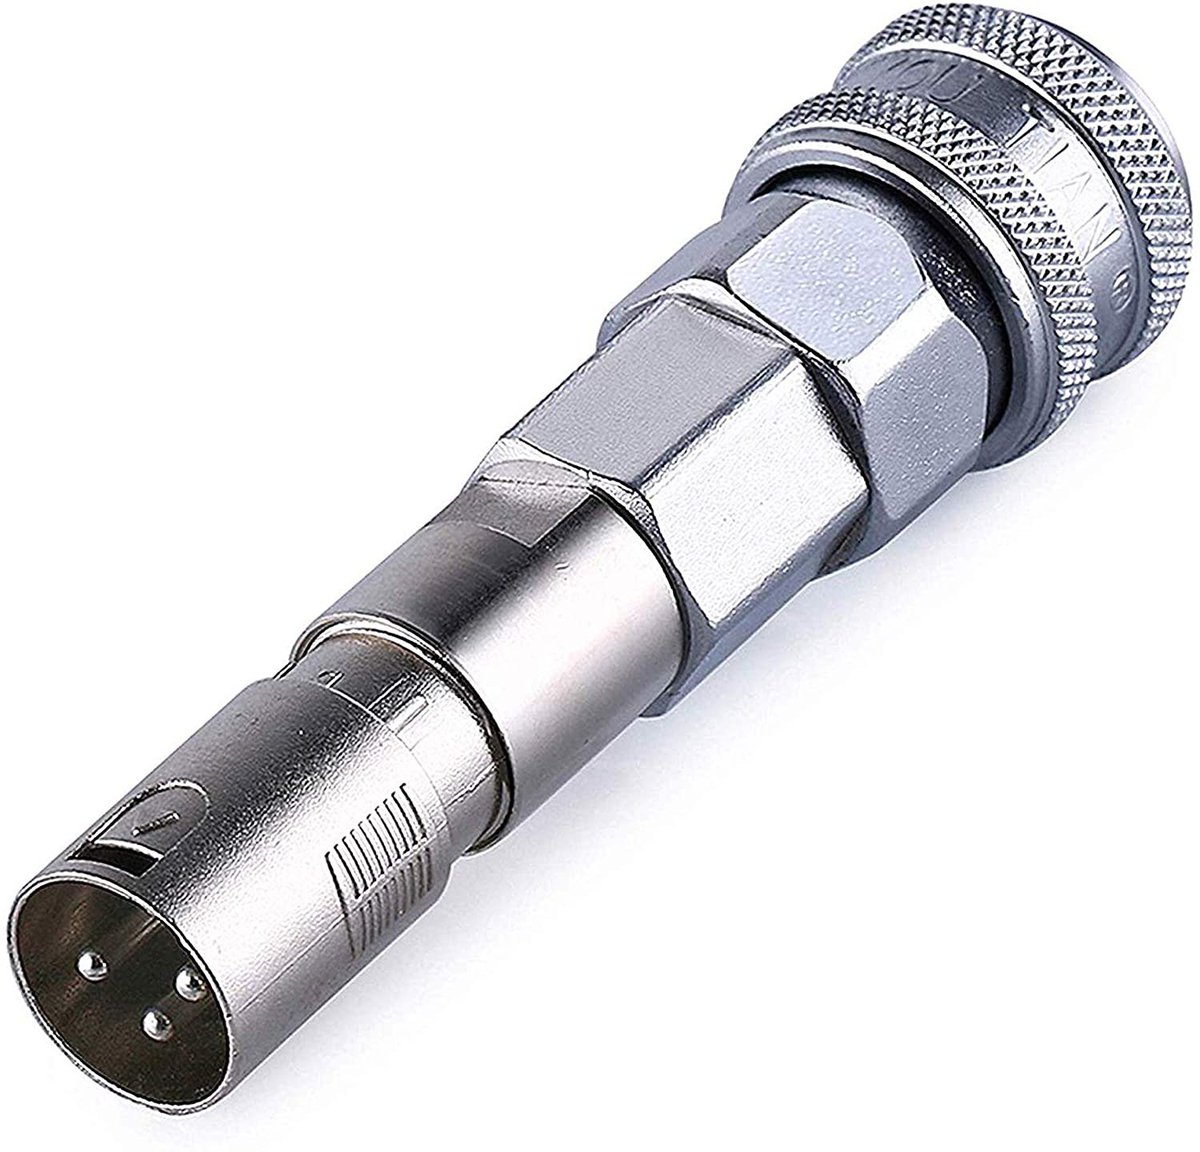 BTW, the use of these various connectors by hismith means you can get cursed adapters like this, which are XLR on one end and quick air connector on the other end.because naturally you might need to convert between compressed air and balanced stereo